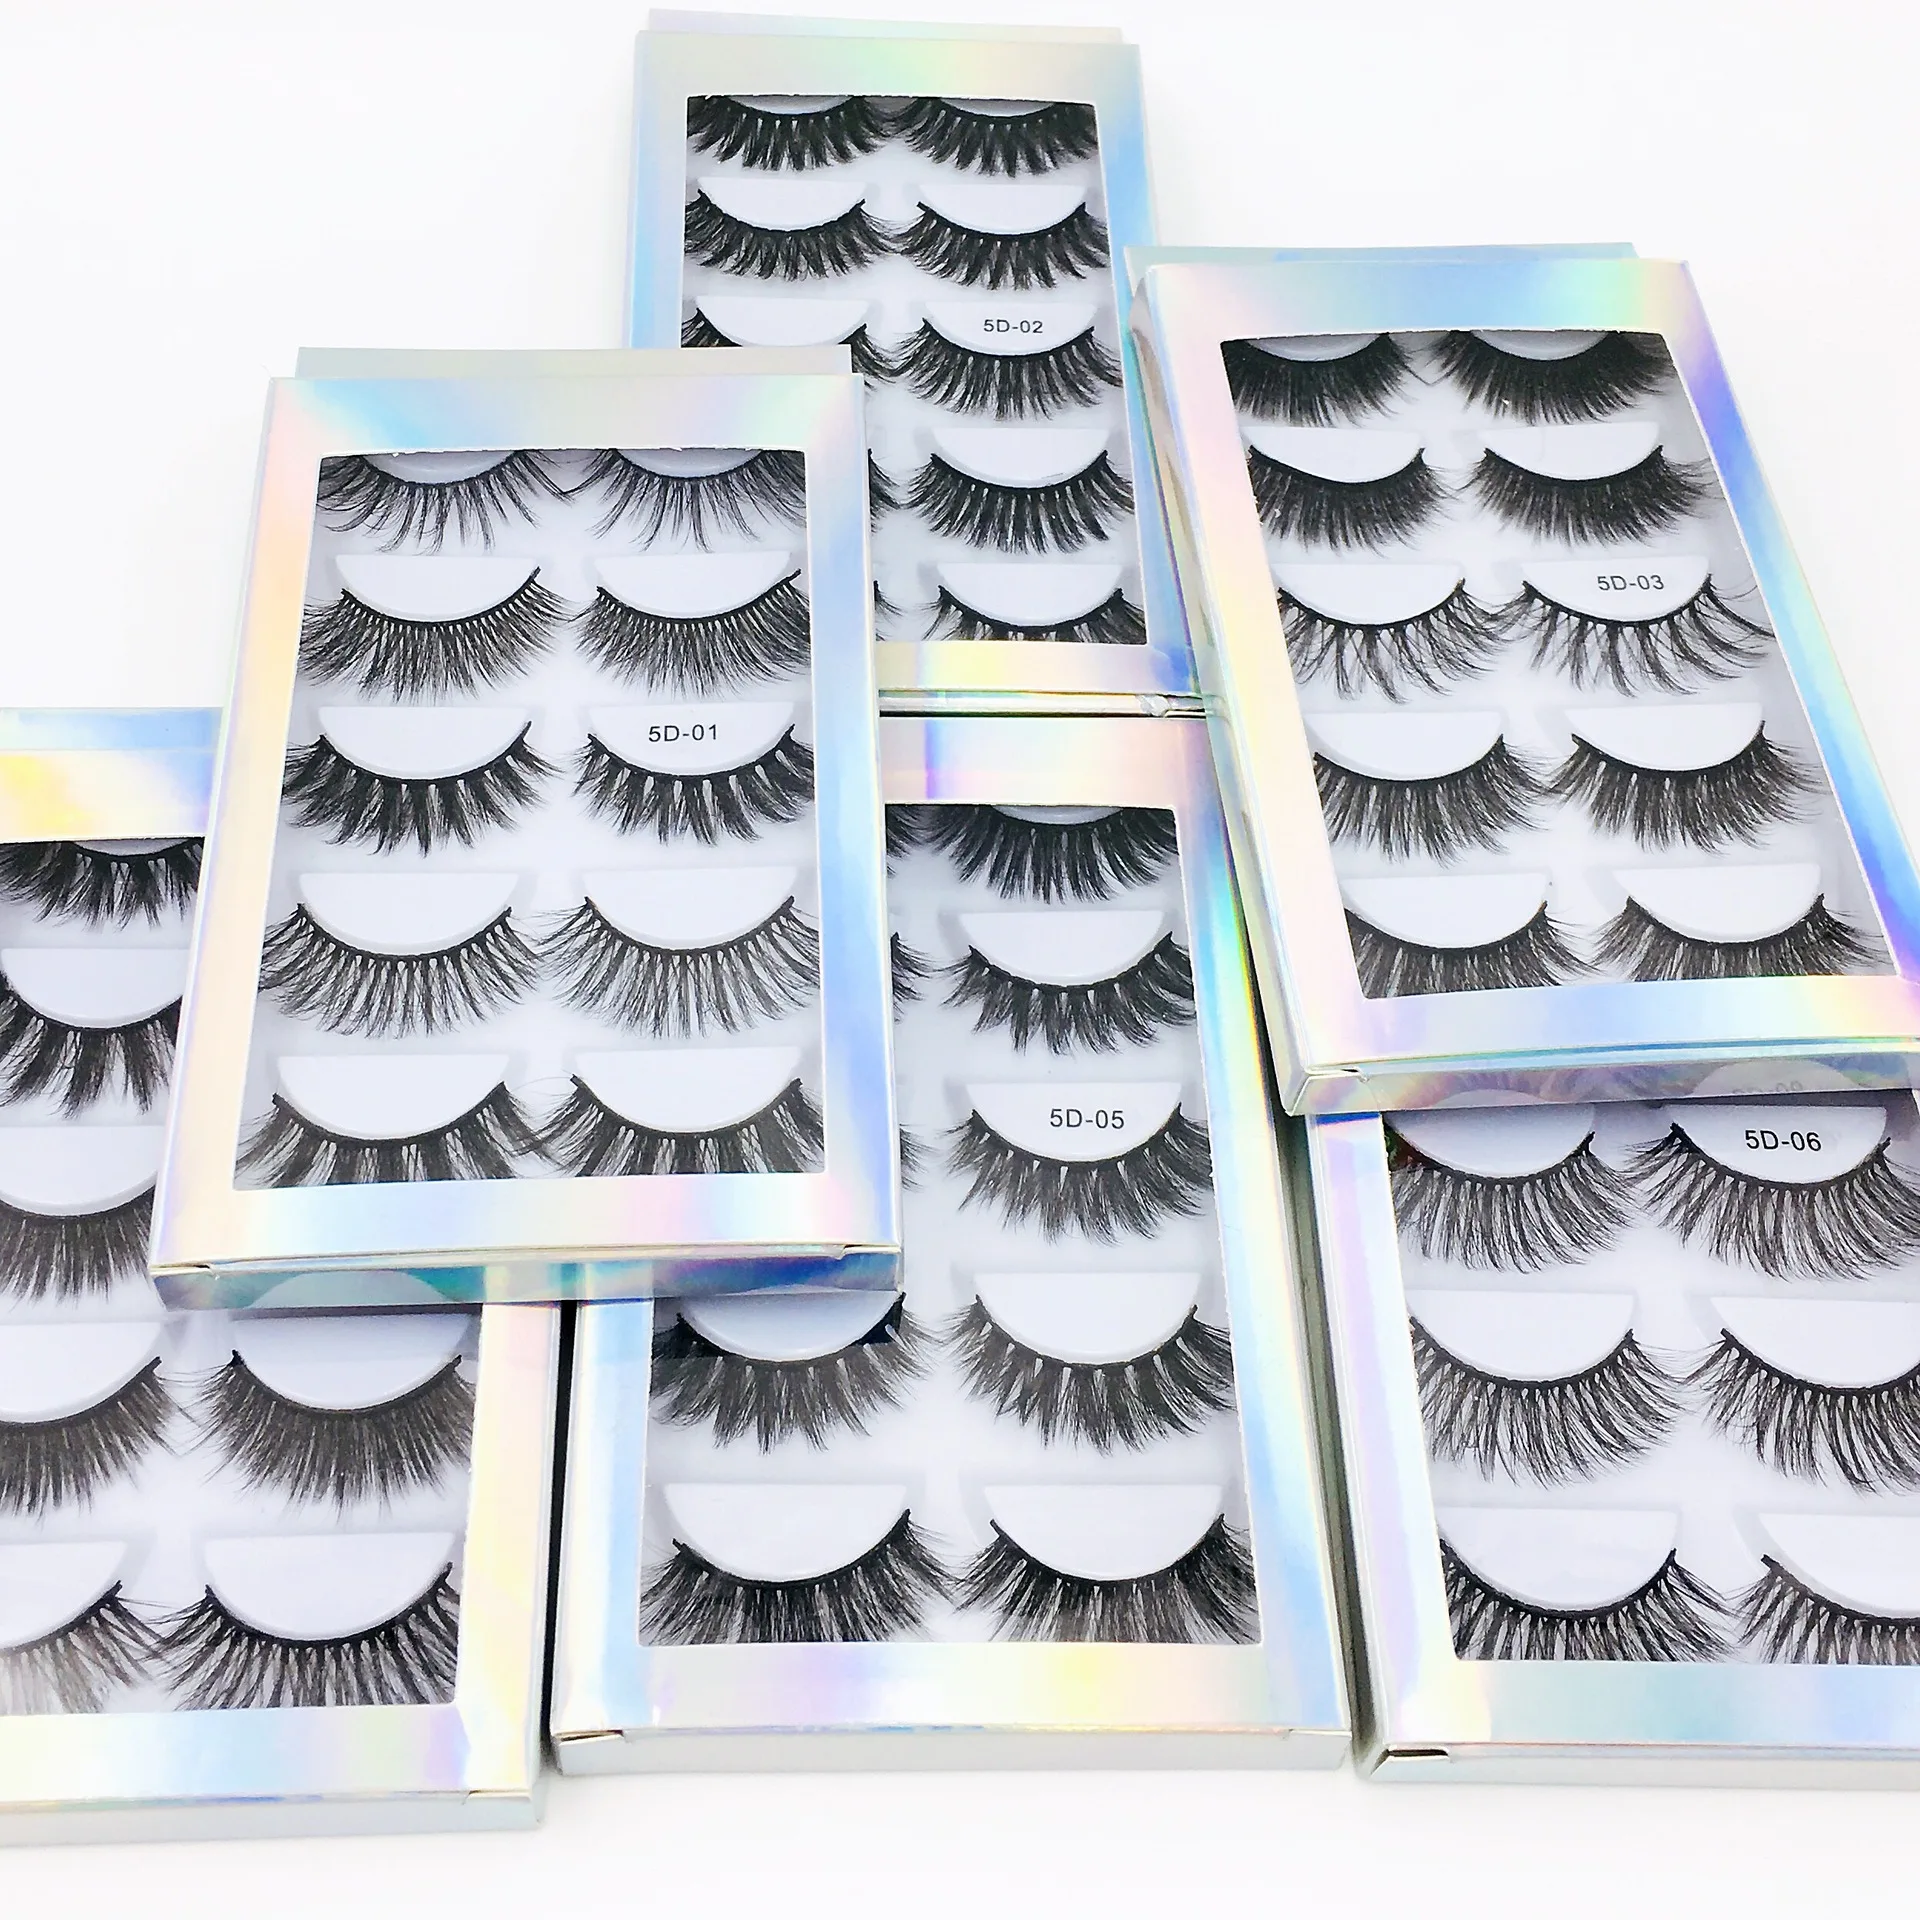 

Create Your Own Lashes Brand 5 Pairs 3d Fluffy Faux Mink Lash Vendor With Luxury Holographic Lash Cases, Natural black